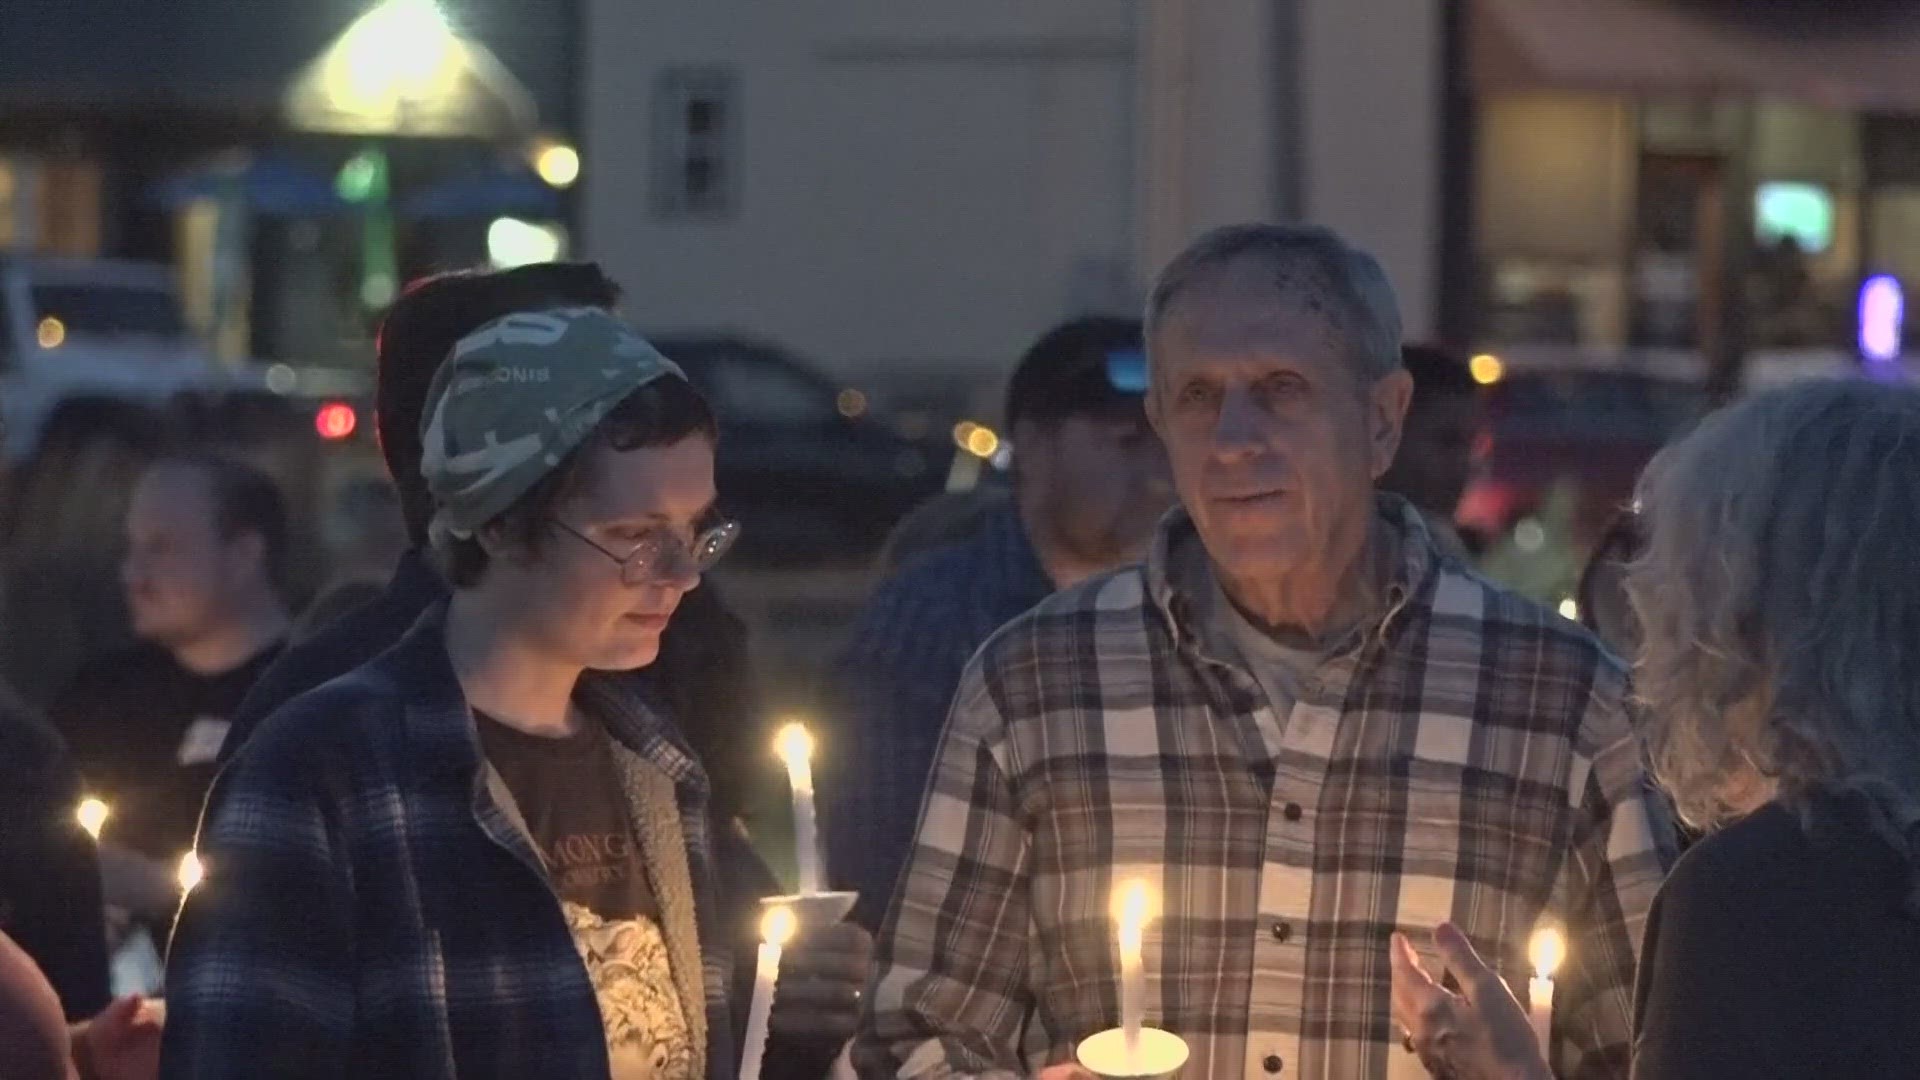 Community members in Lisbon gathered together Saturday night to honor the 18 lives lost in a mass shooting incident in Lewiston Wednesday, Oct. 25.